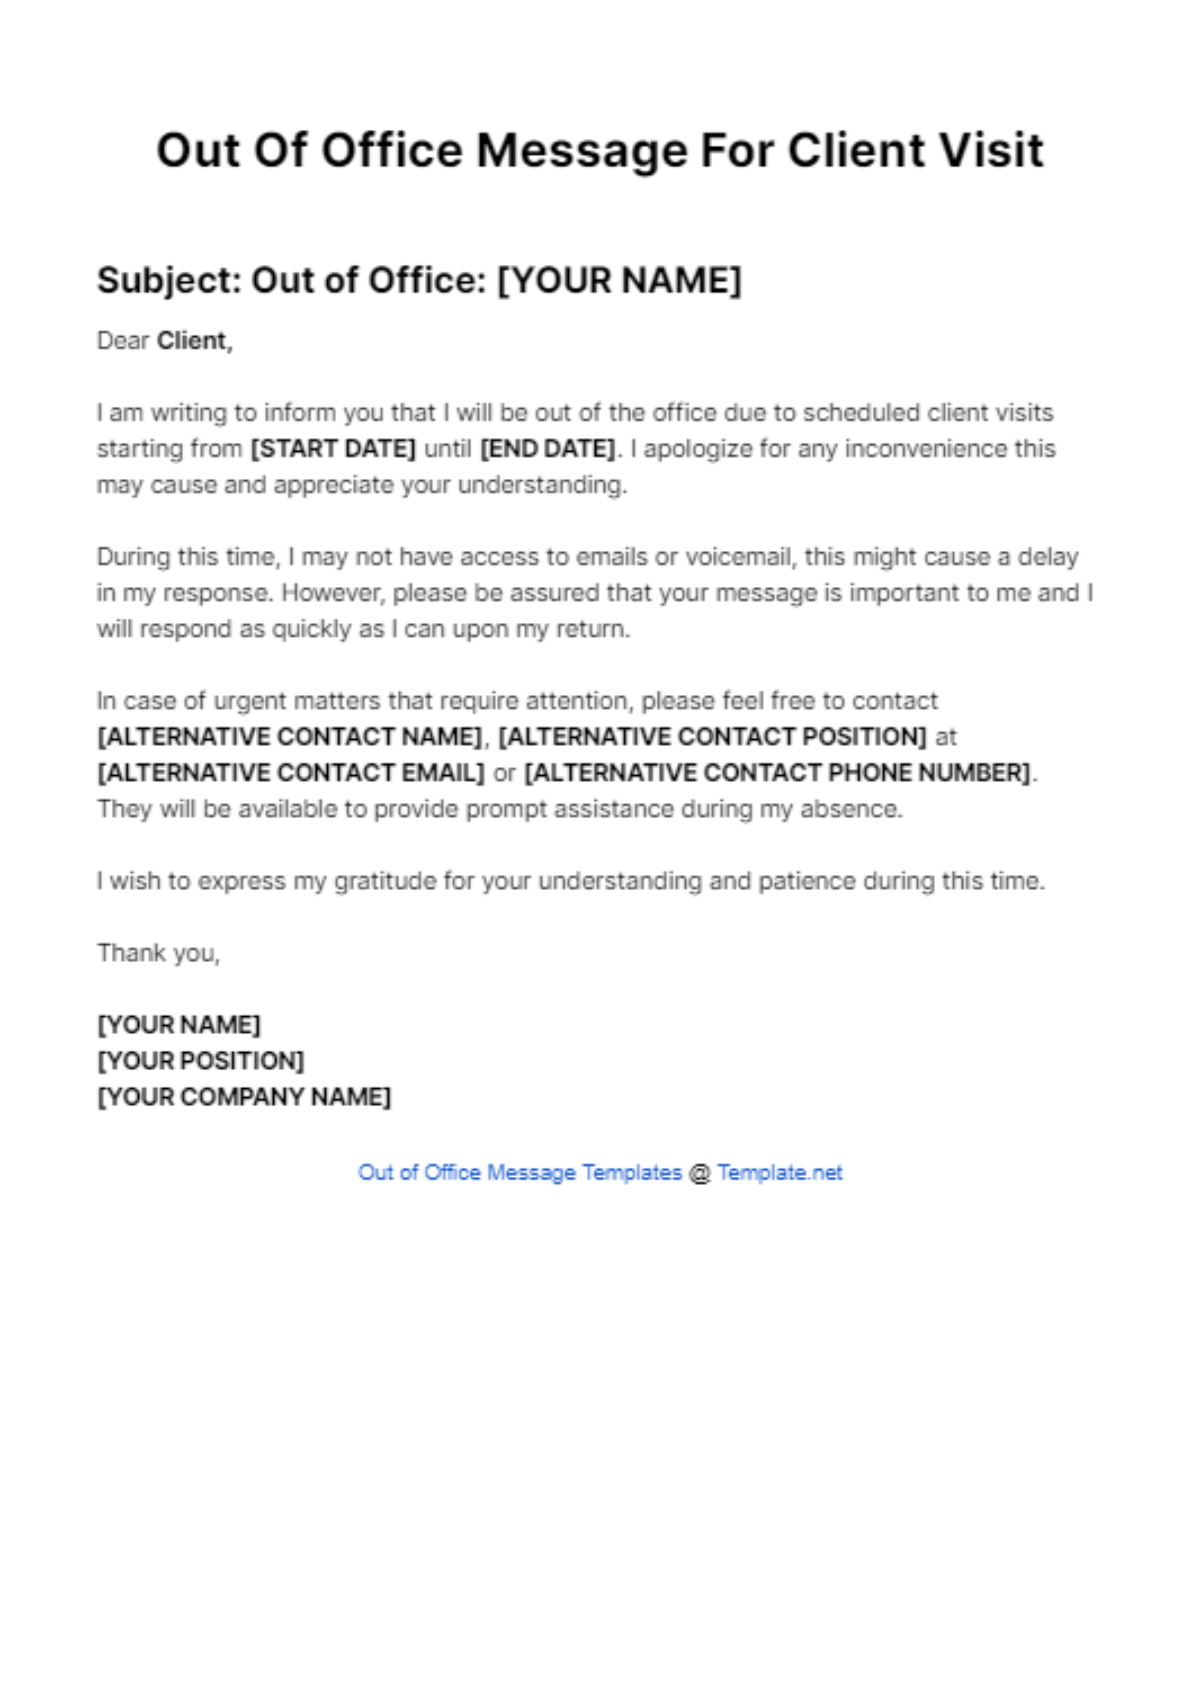 Out Of Office Message For Client Visit Template